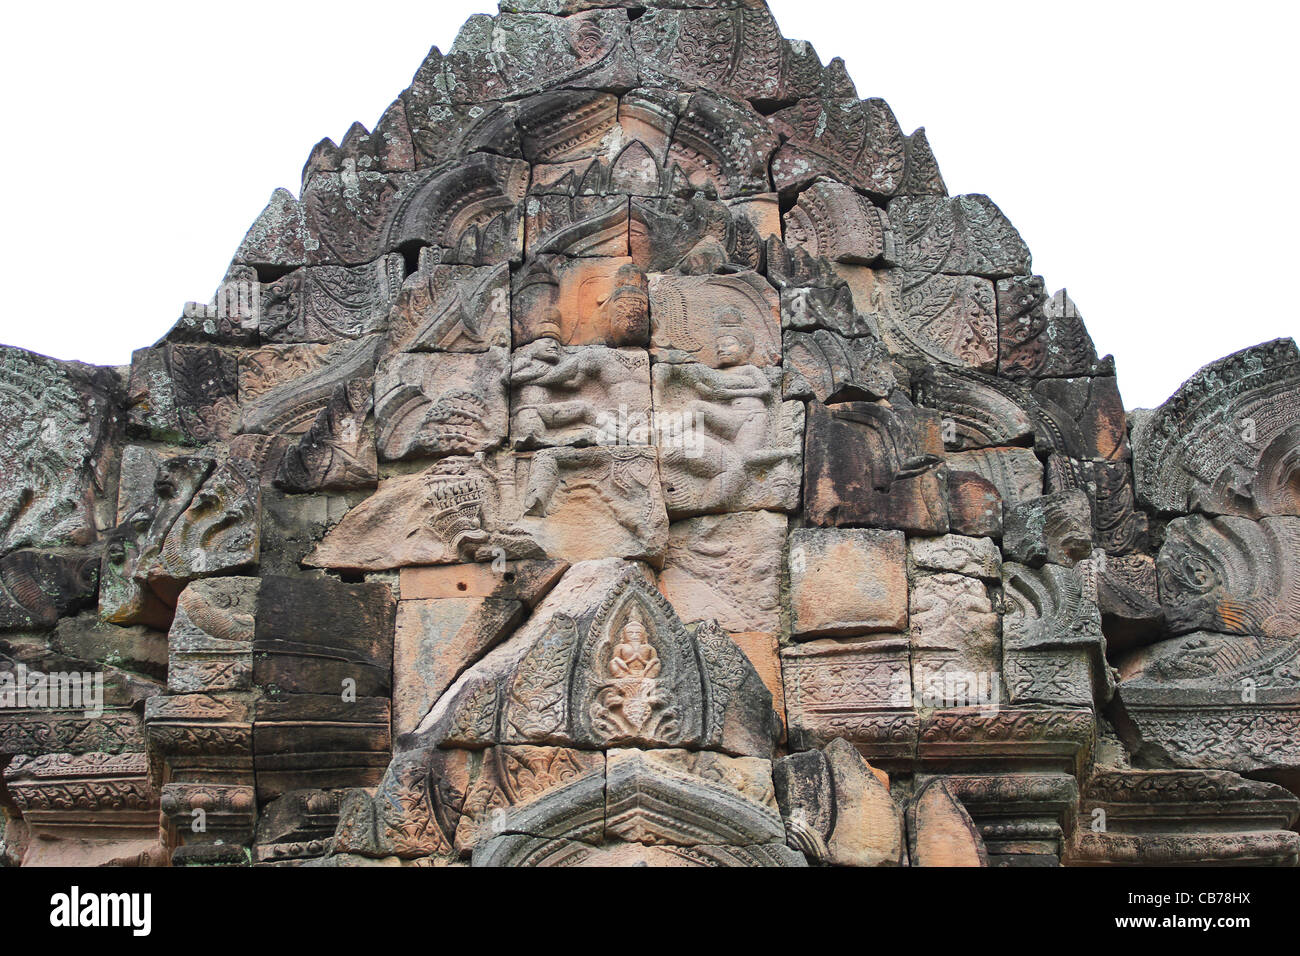 Phanomrung Cambodian ancient temple on the Thailand, Cambodian border. Stock Photo